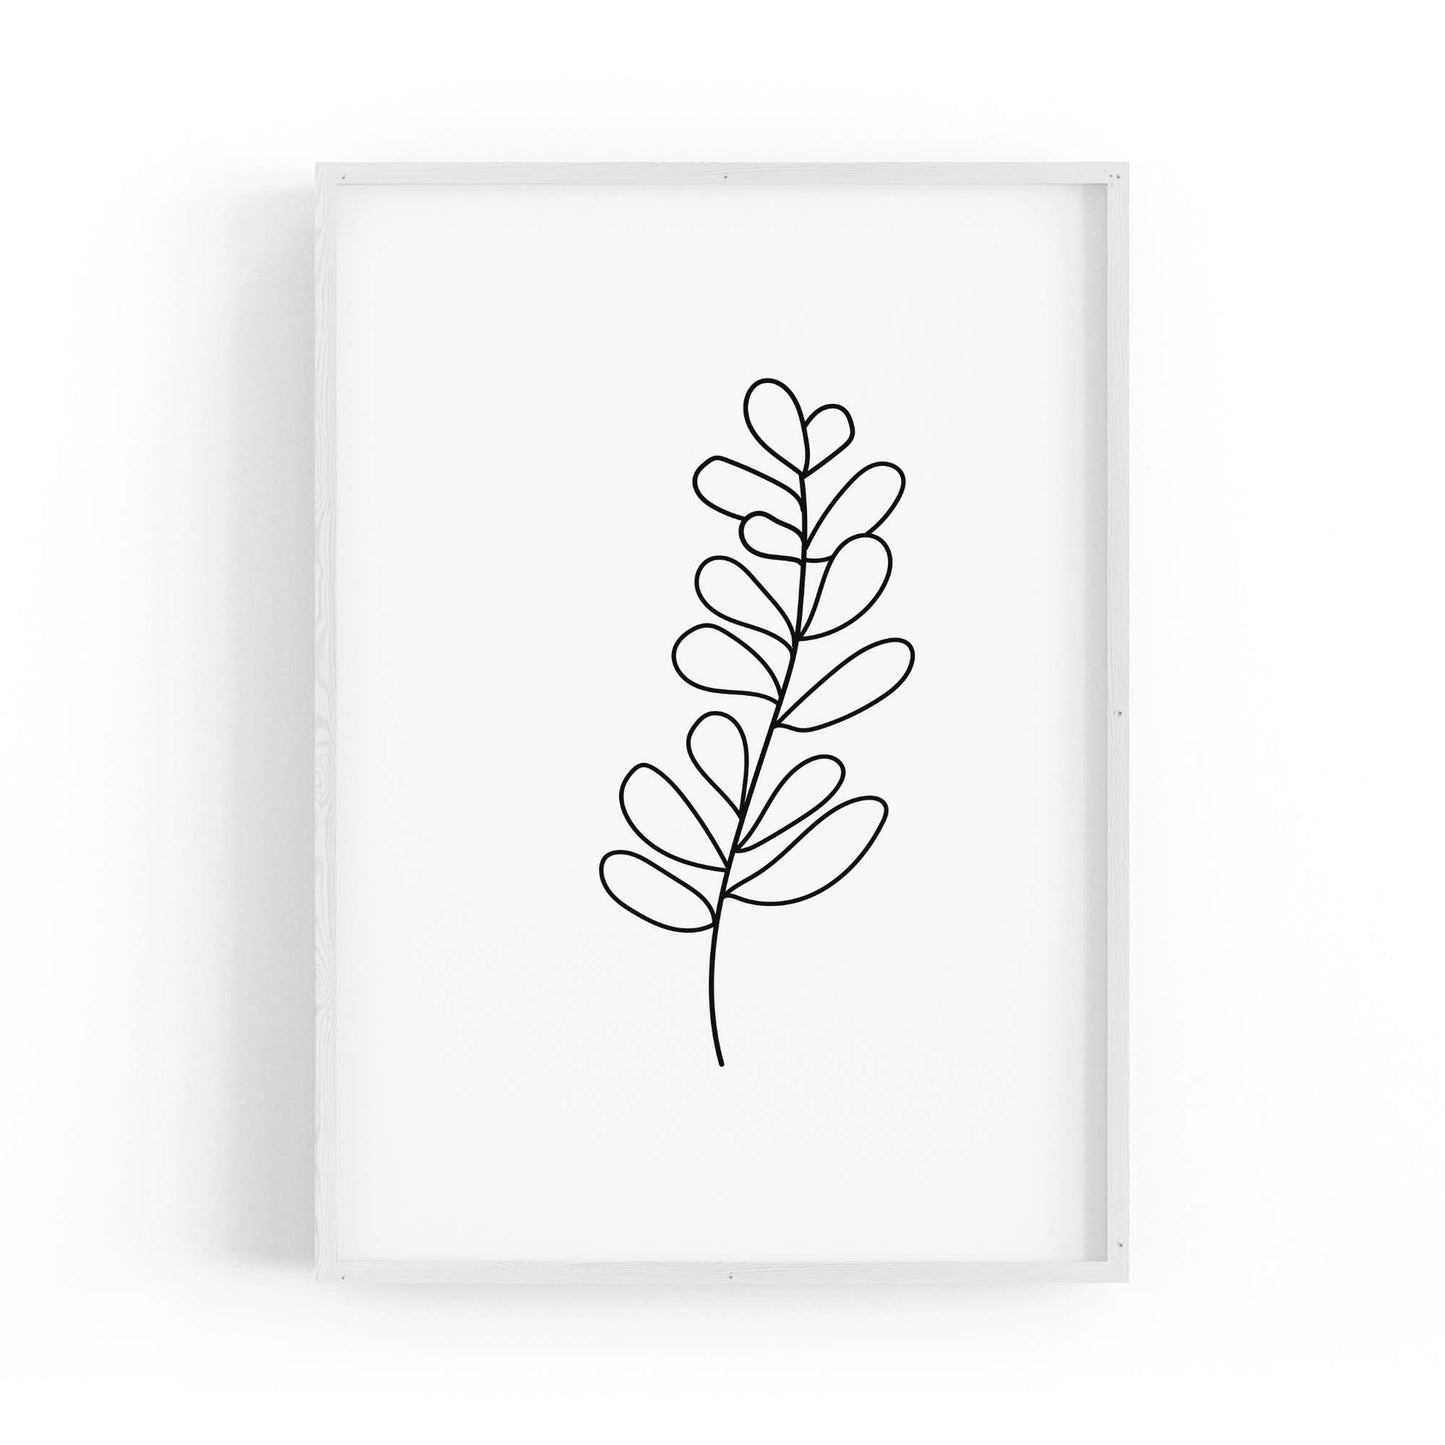 Minimal Branch Line Drawing Plant Nature Wall Art #2 - The Affordable Art Company